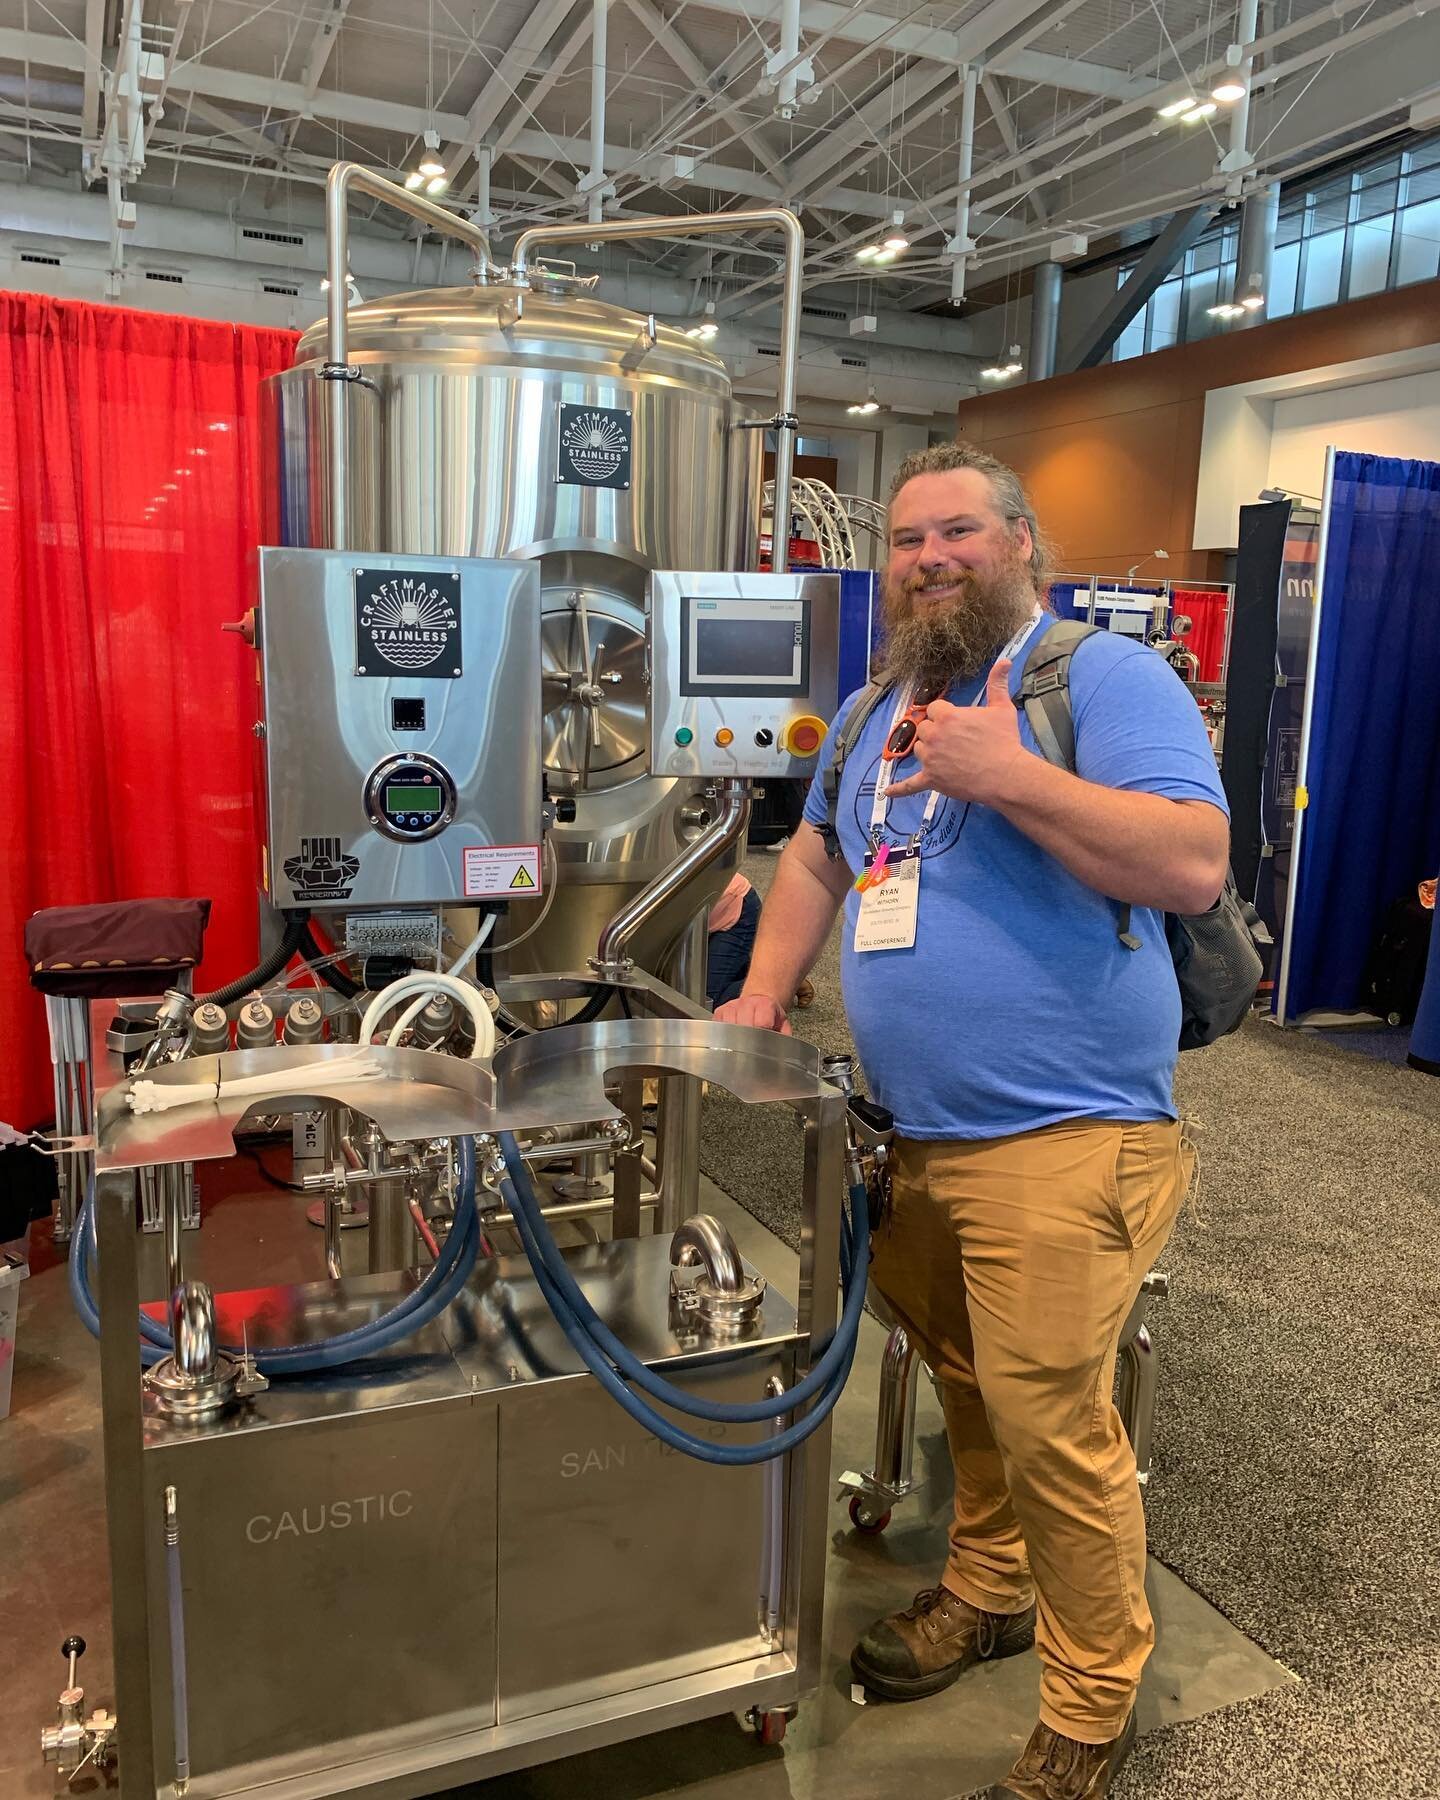 Our friends @studebakerbrewingco rolled out of the Craft Brewers Conference with our Keggernaut Keg Washer.⁣
⁣
You won&rsquo;t be disappointed, my friend! ⁣
⁣
Enjoy you easy Keg Washing now!⁣
⁣
Cheers 🍻